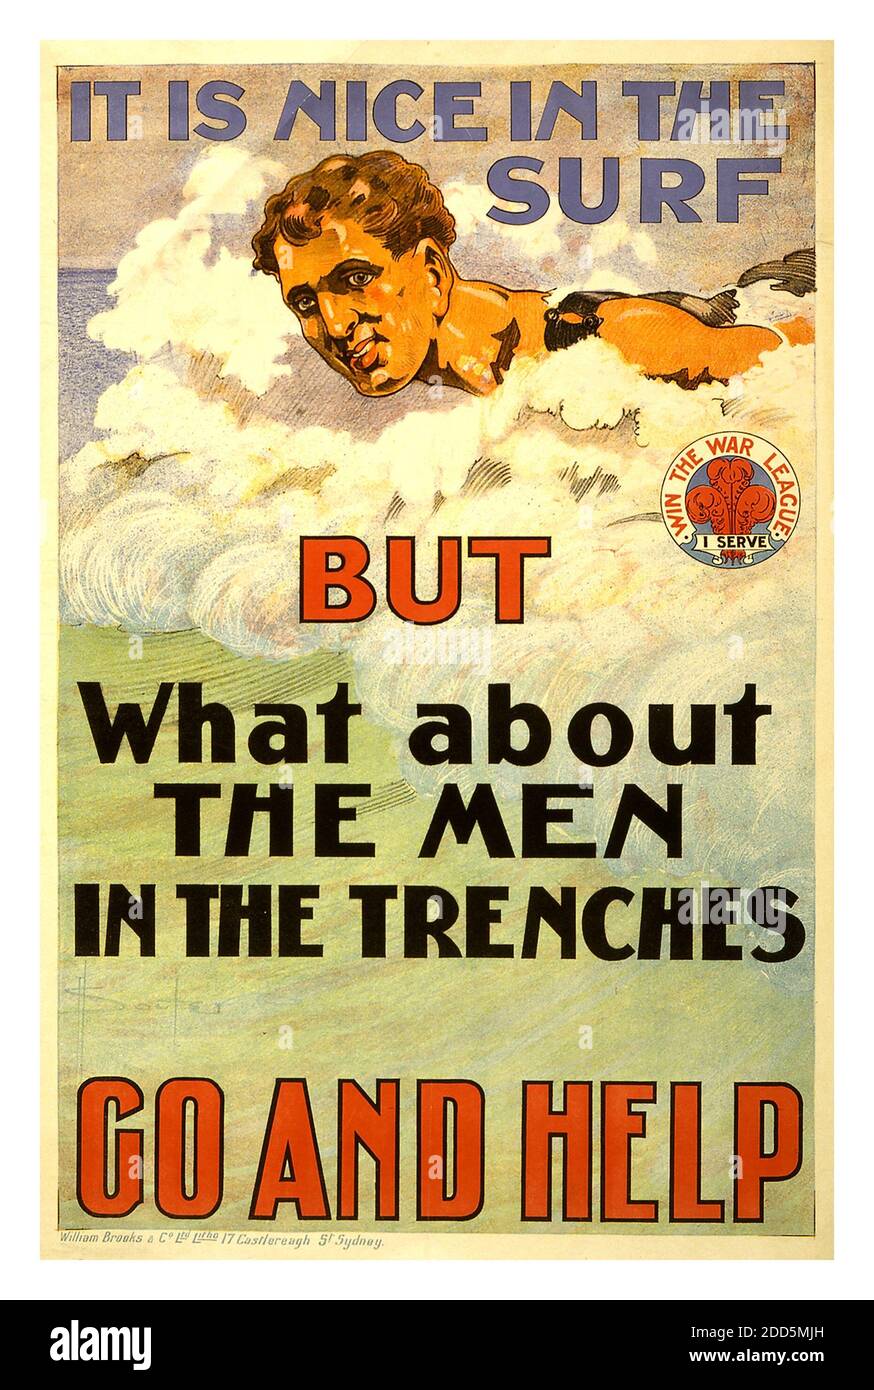 Vintage WW1 1917  recruitment Australian poster  'ITS NICE IN THE SURF BUT WHAT ABOUT THE MEN IN THE TRENCHES.. GO AND HELP representative of many from the win the war league 'serve' used to recruit volunteers to serve with the British forces in World War I. Australian recruitment drives were highly successful and resulted in more than 400,000 men enlisting from a population of fewer than five million. Posters such as this one appealed to the Australian value of “mateship” or comradeship, while others appealed to patriotism. First World War Stock Photo